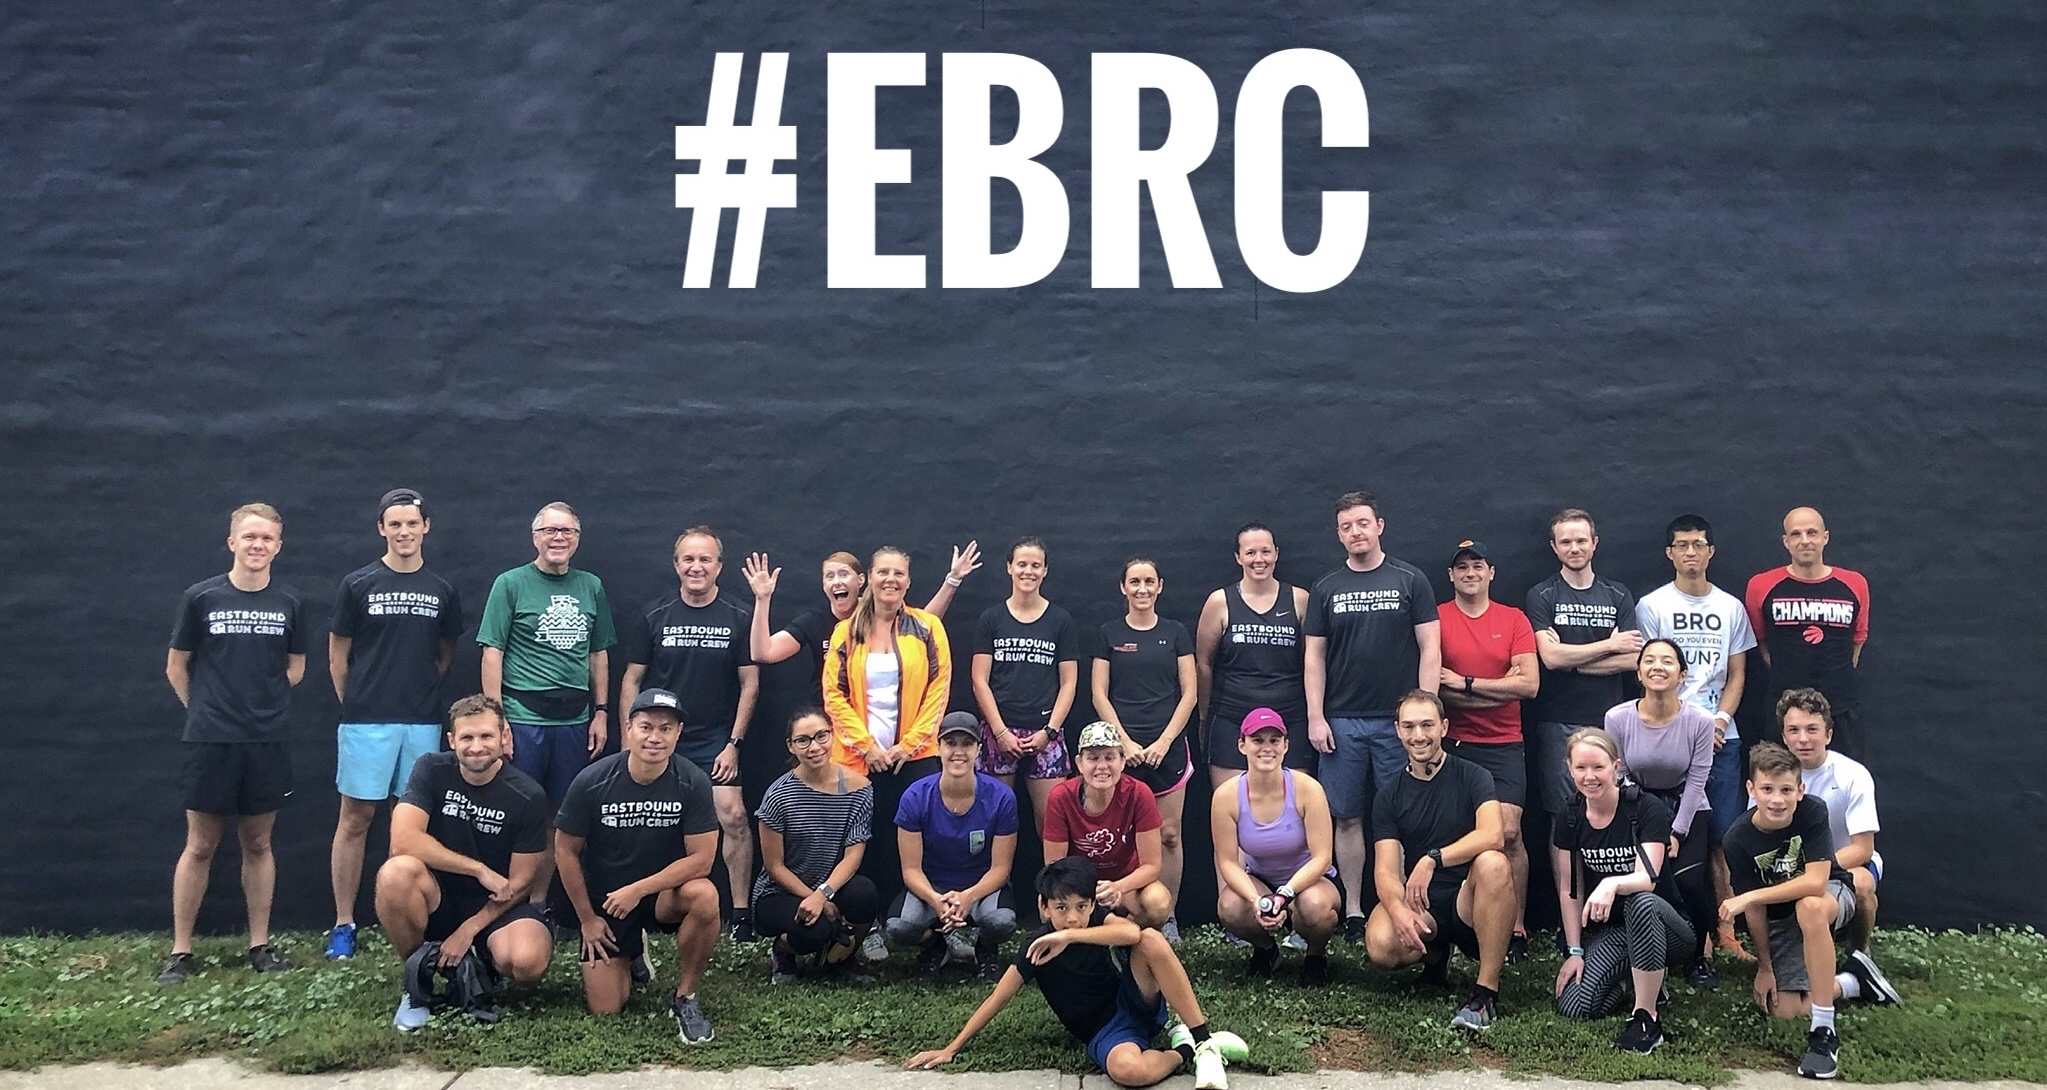 Group shot of runners against a black wall with #EBRC super imposed above